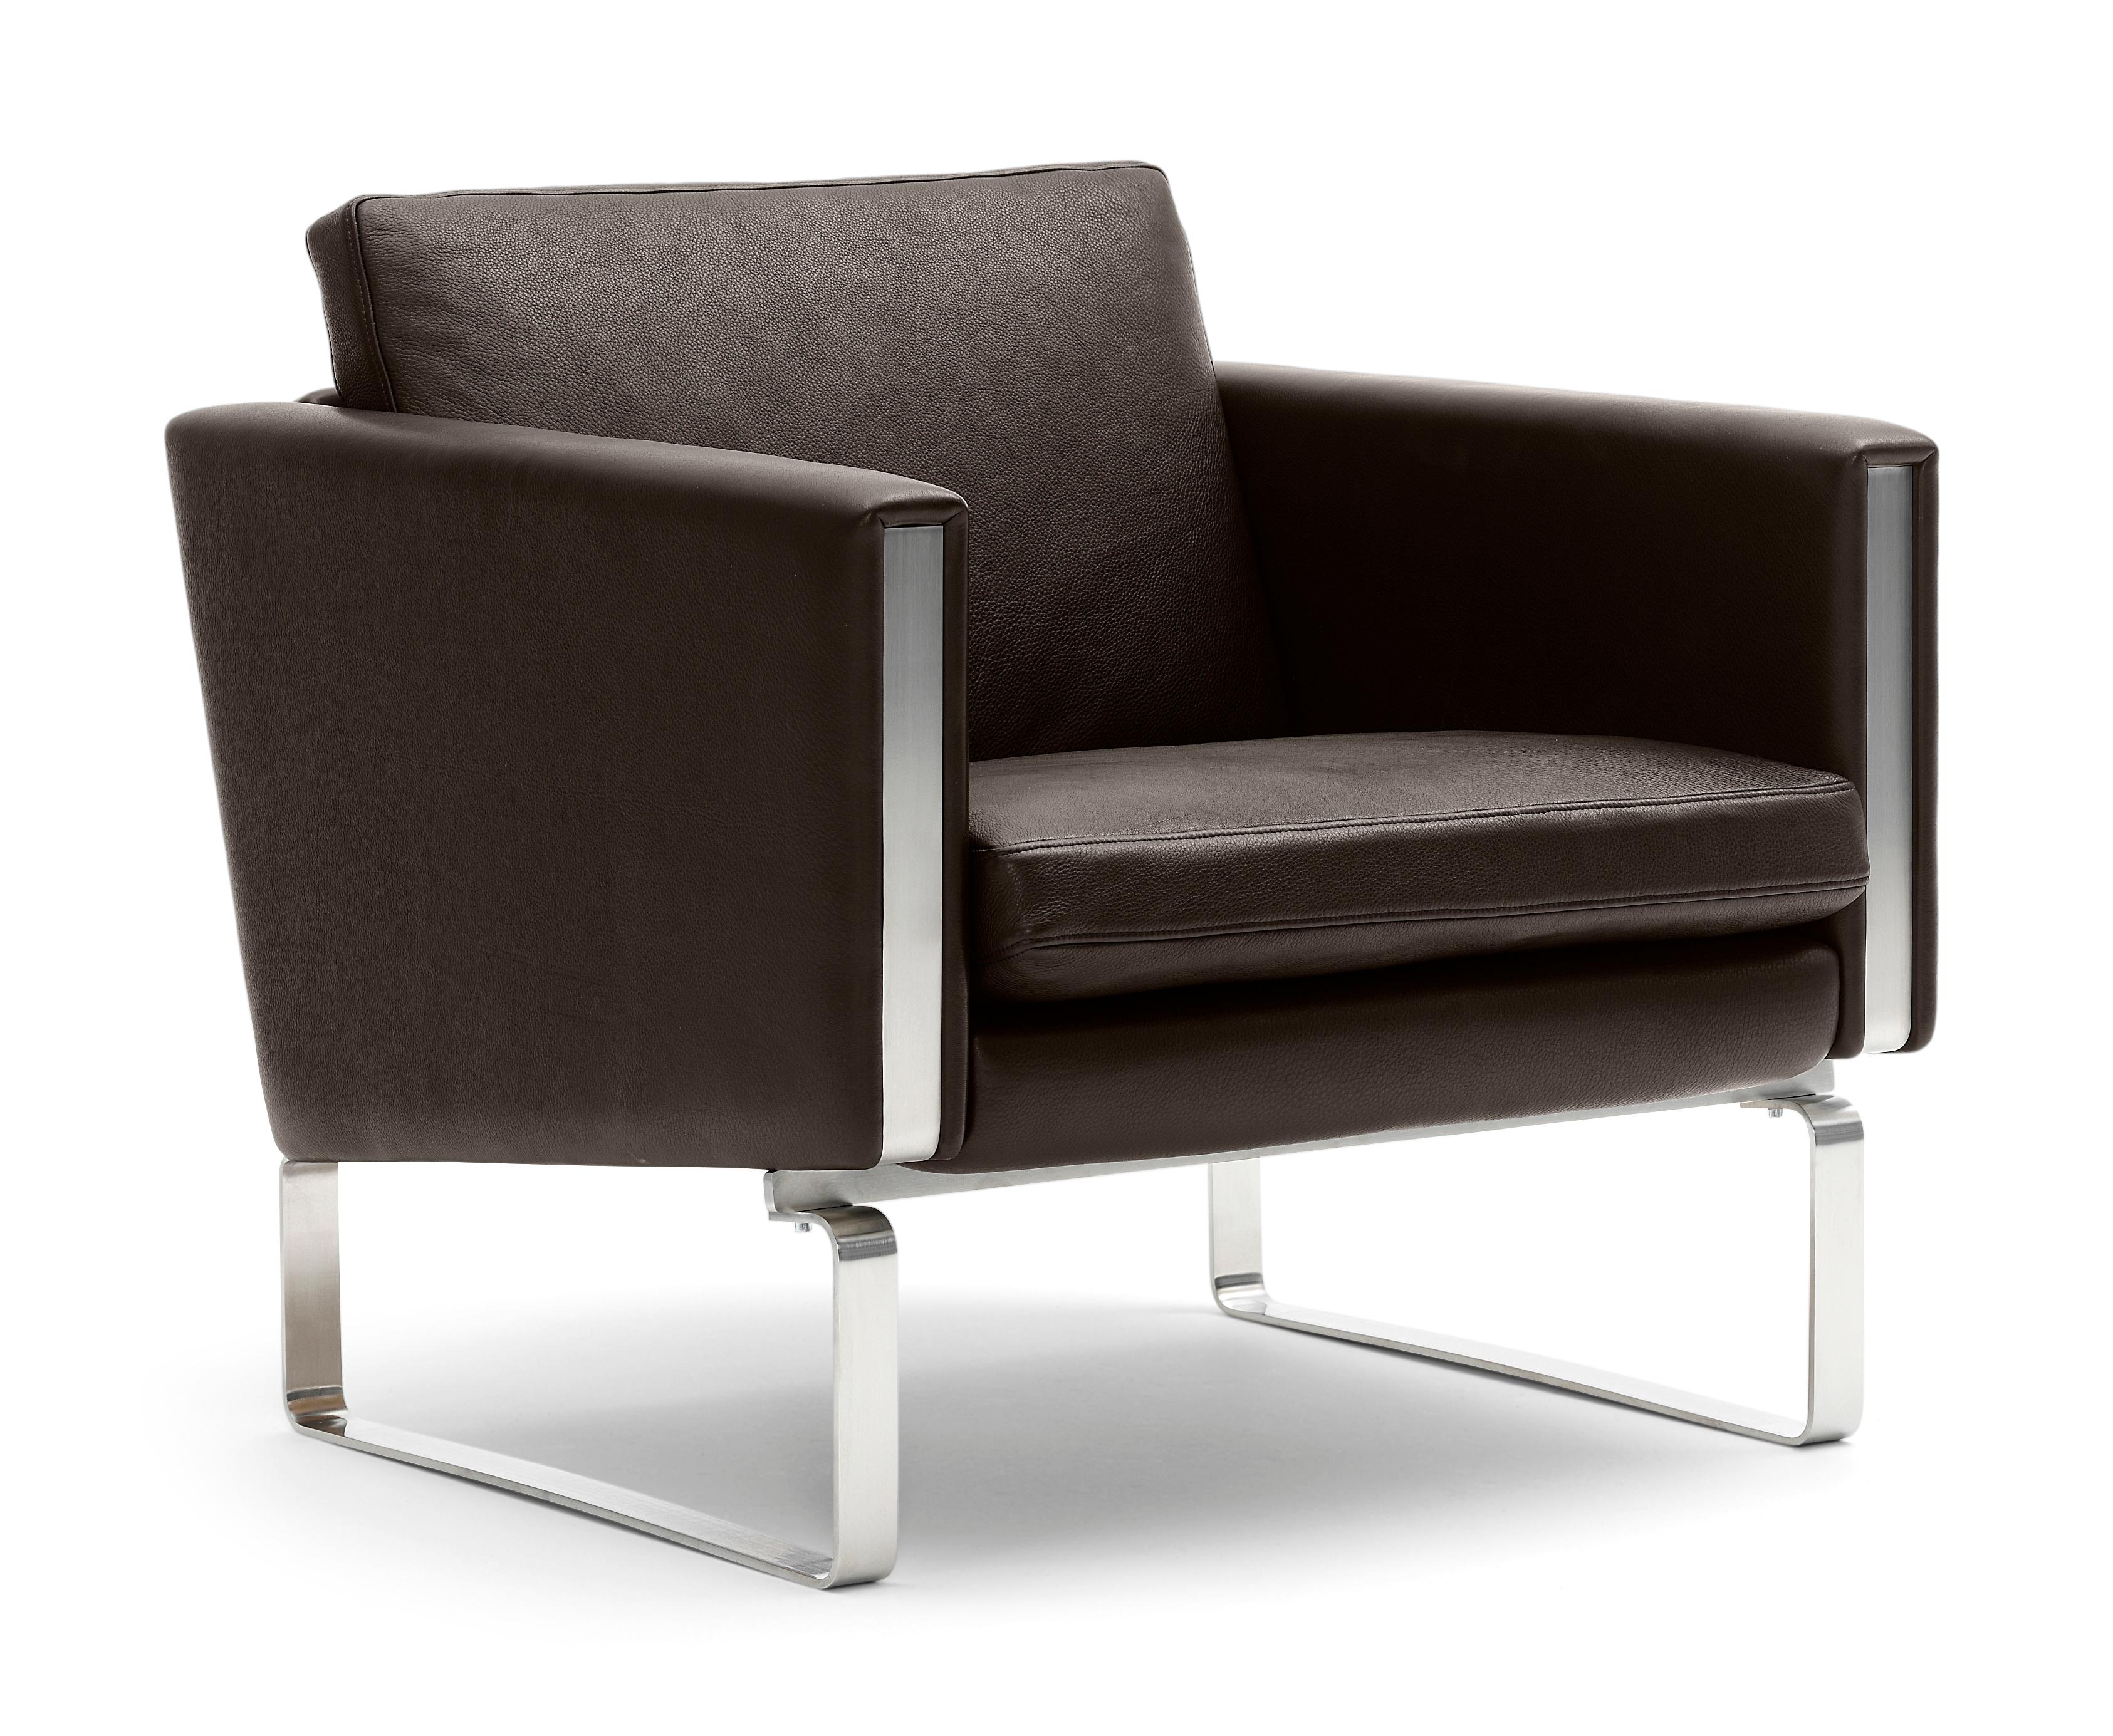 Brown (Thor 306) CH101 Chair in Stainless Steel Frame with Leather Seat by Hans J. Wegner 2